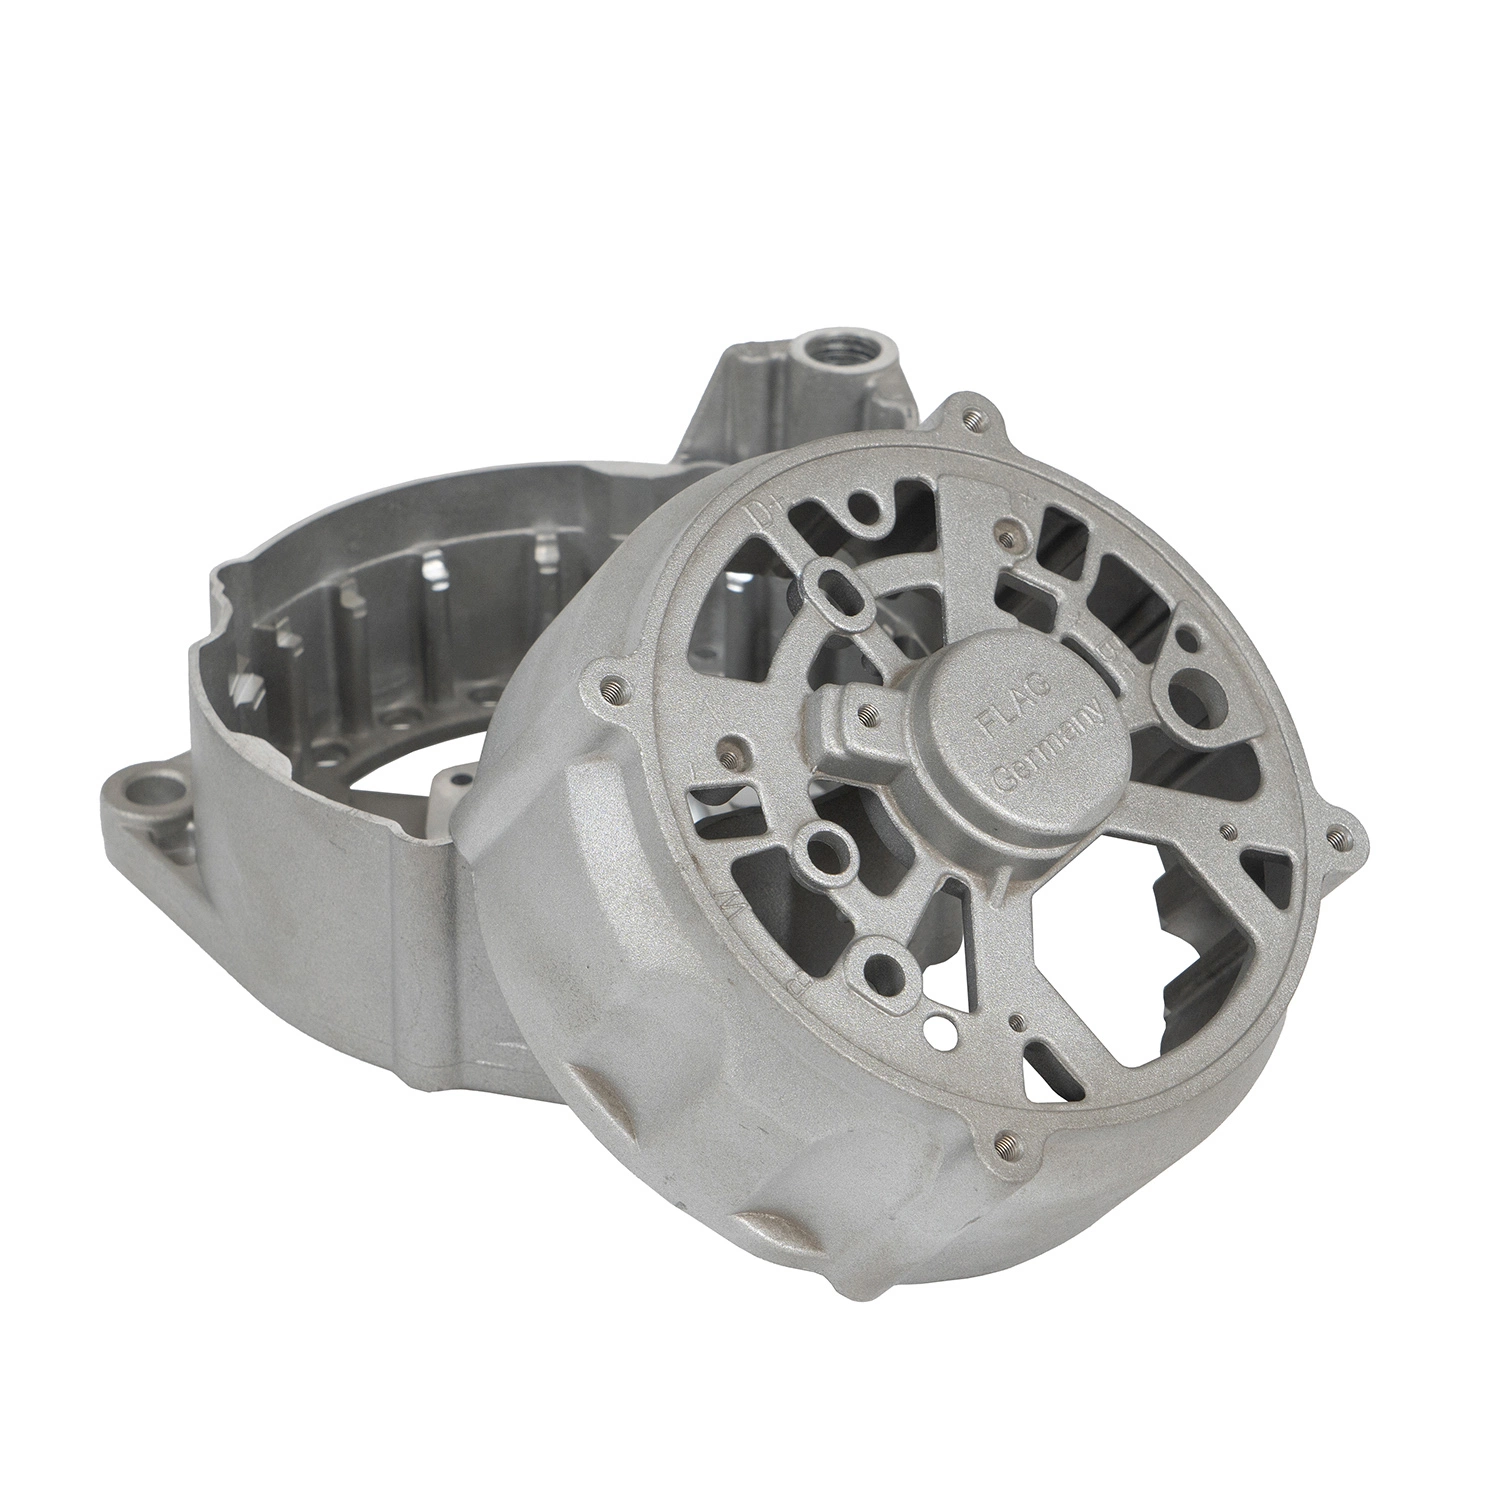 Aluminum Die-Casting Customization Aluminum Die-Casting Products No Sand Holes Can Be Customized in a Variety of Colors